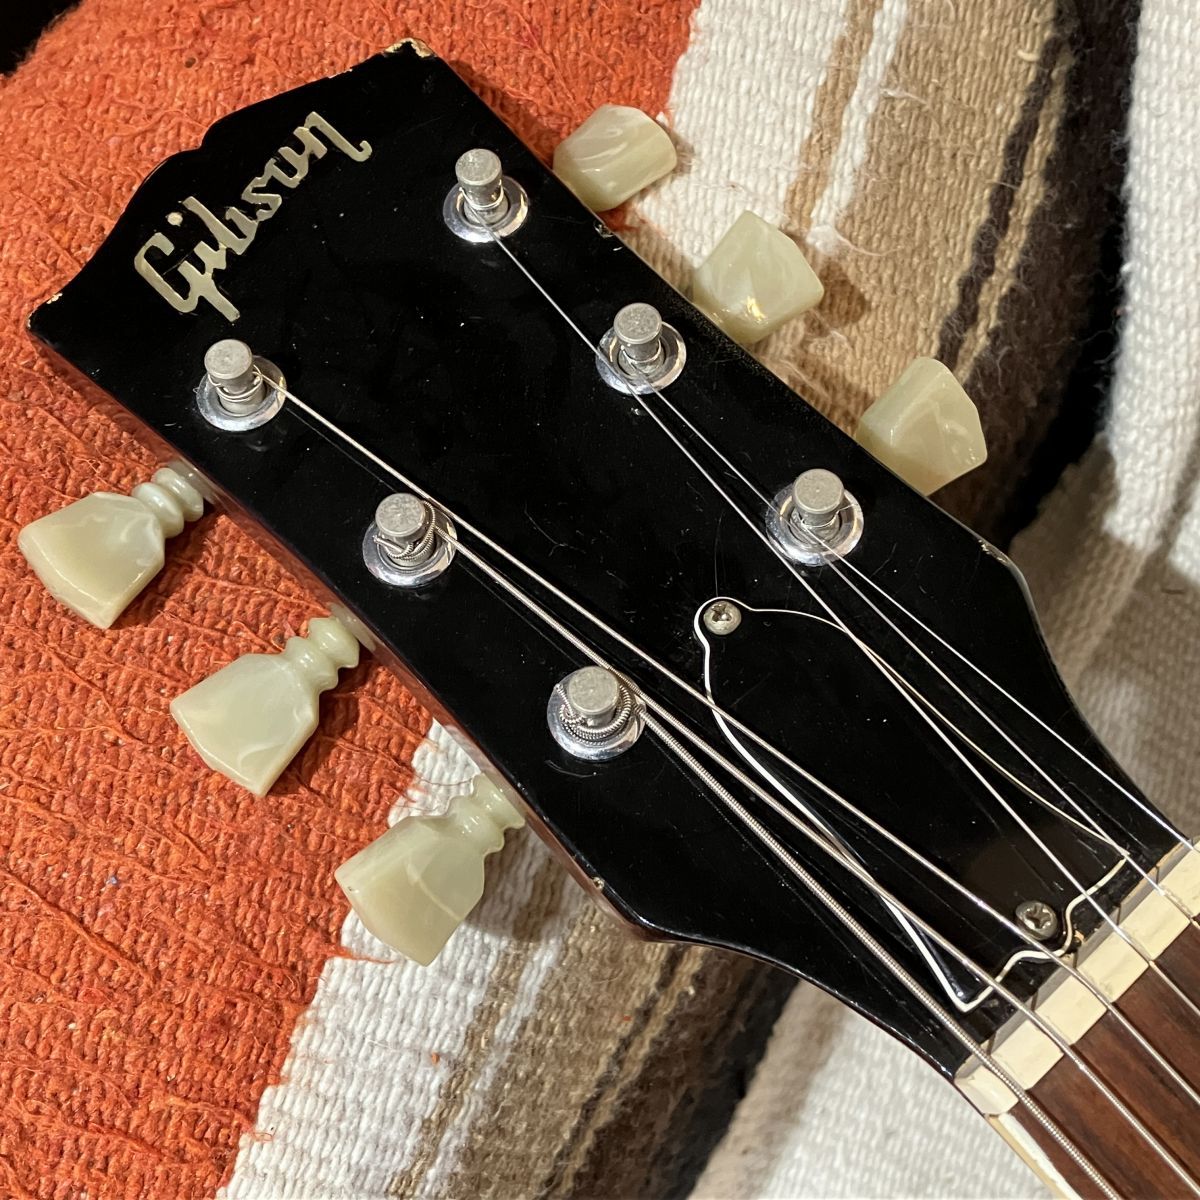 [SN 360656] USED Gibson / 1965 ES-330TDC Cherry [04]